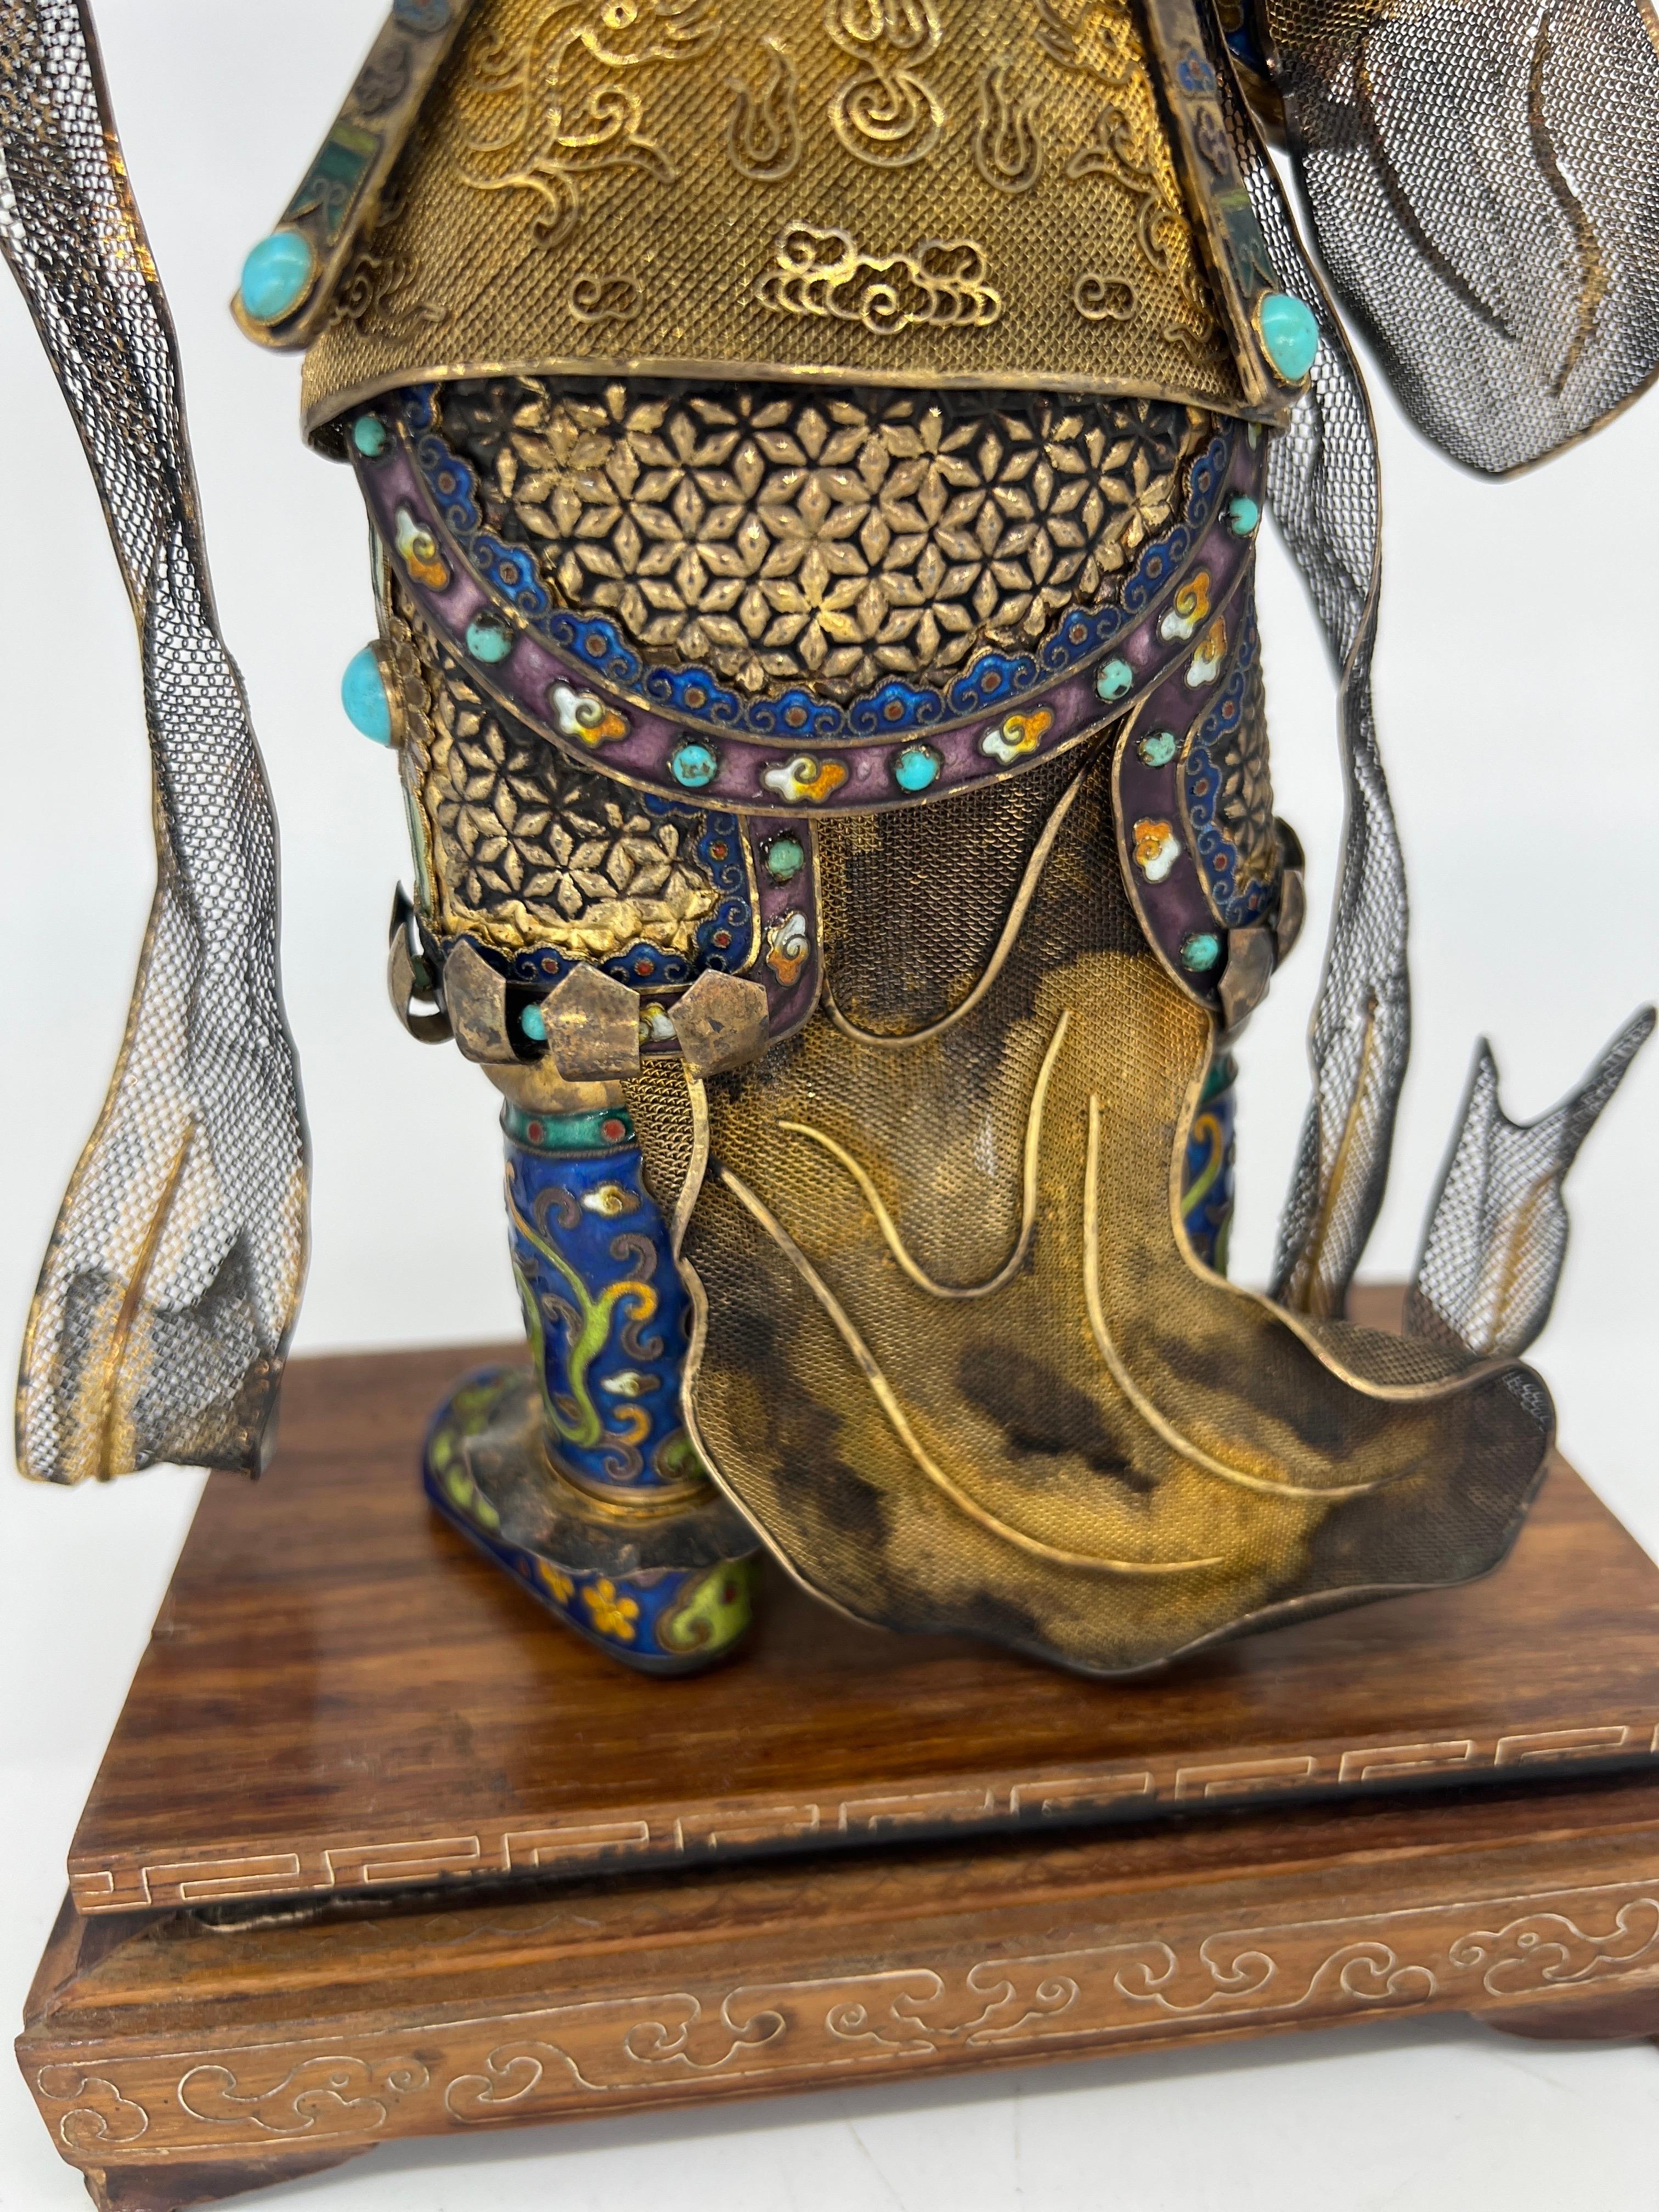 Antique Chinese Silver Gilt, Enamel & Turquoise Mounted Immortal Figurine For Sale 6